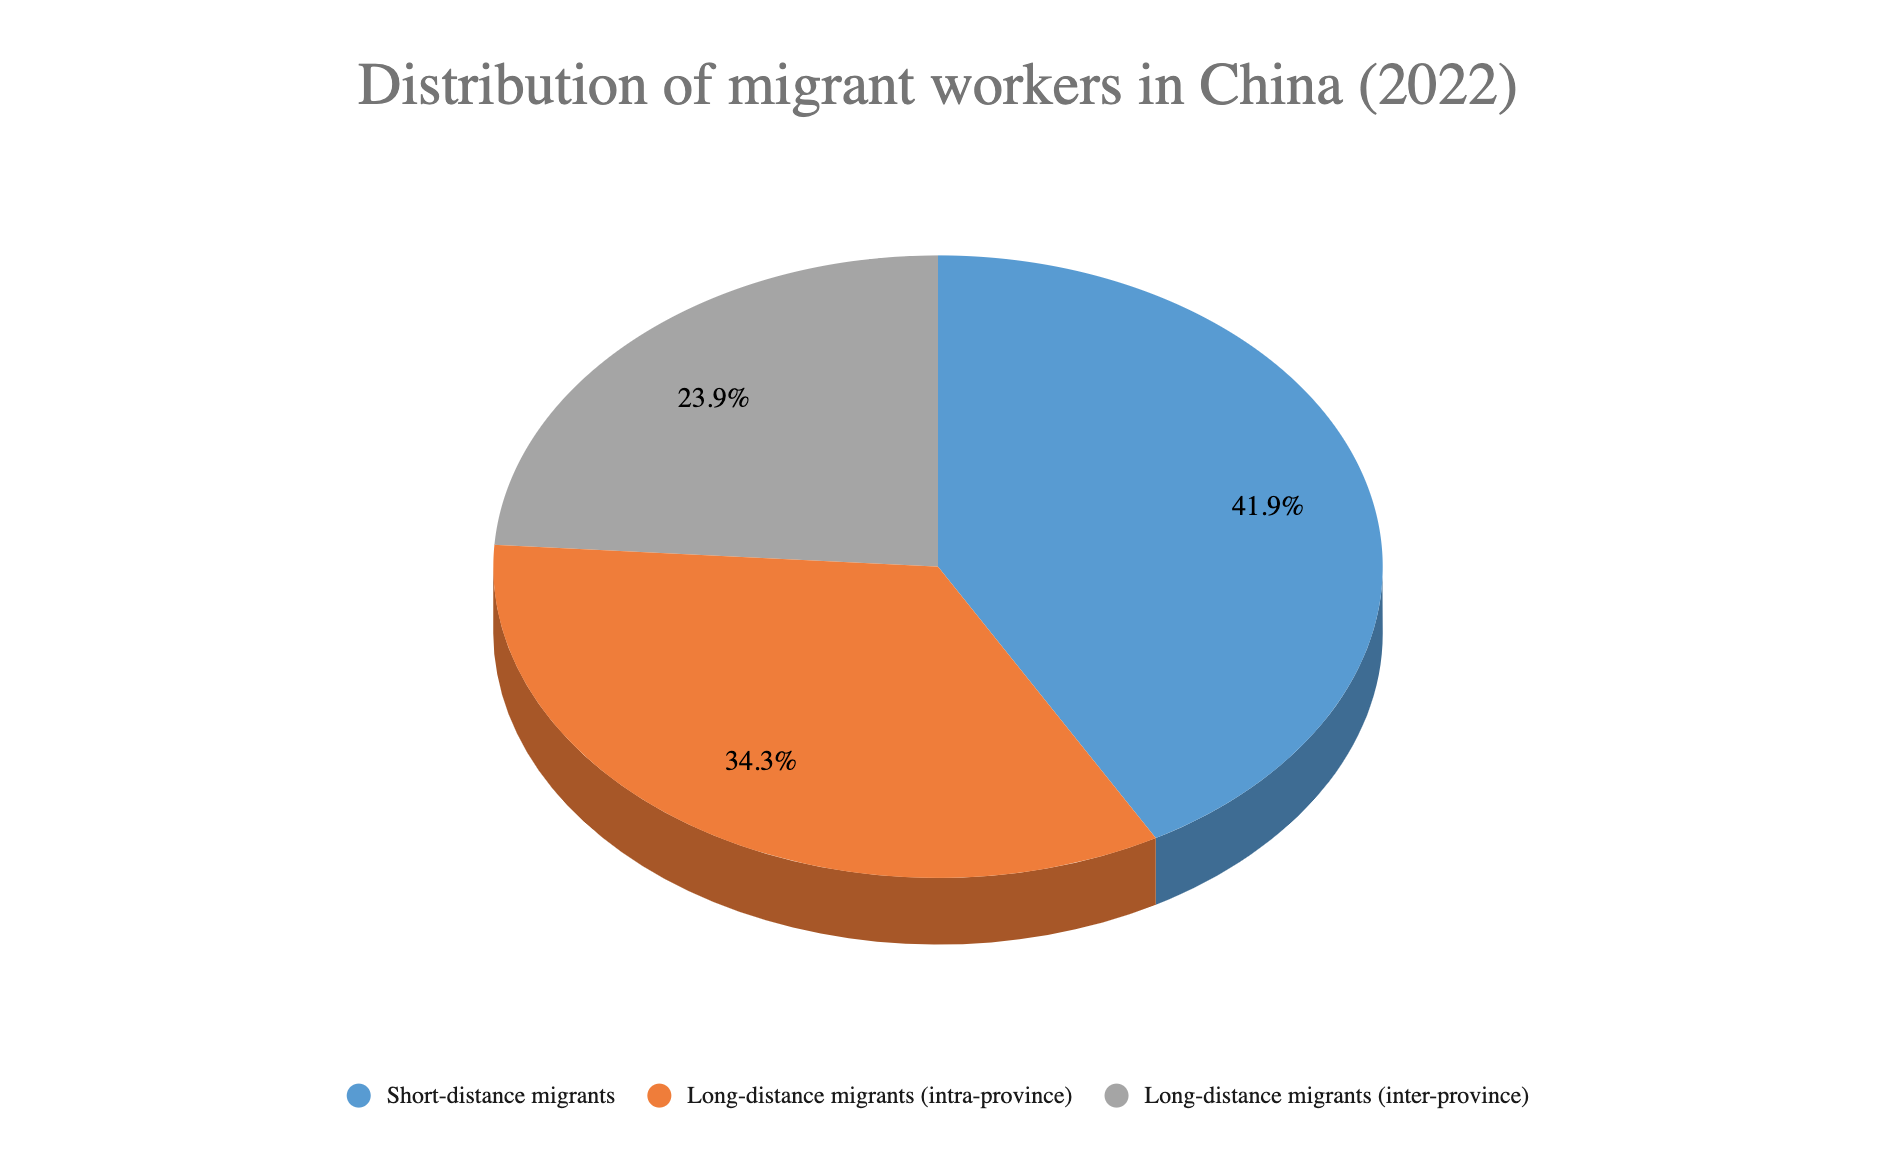 A CLB chart shows the 2022 distribution of migrant workers based on official data